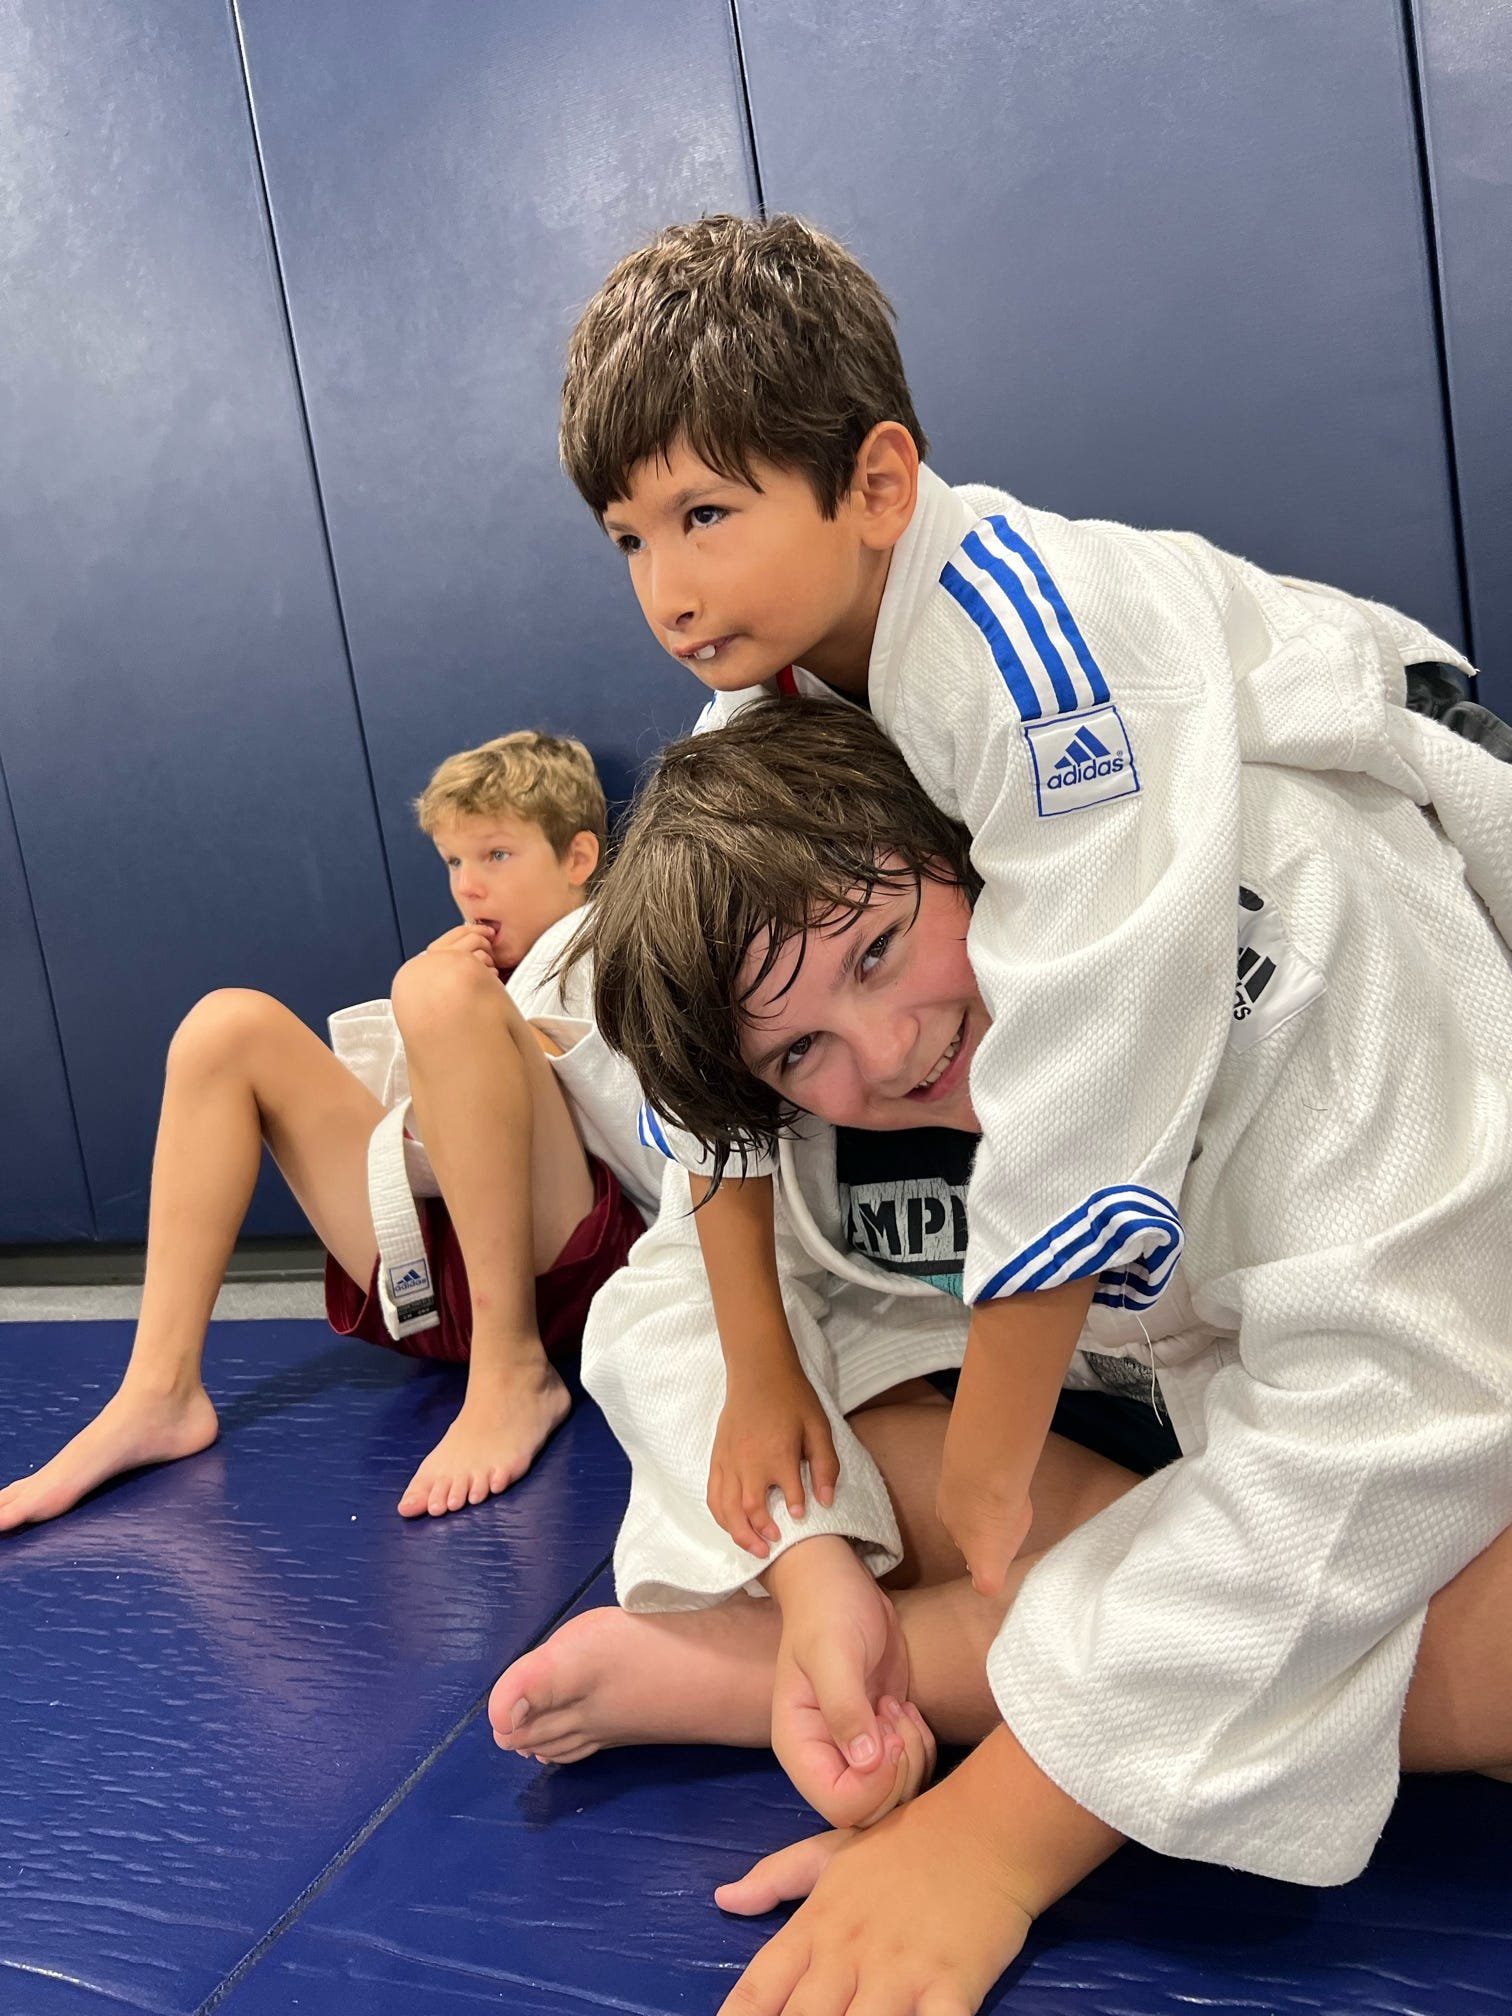  Raffi and Jack taking a break during their judo session at camp 